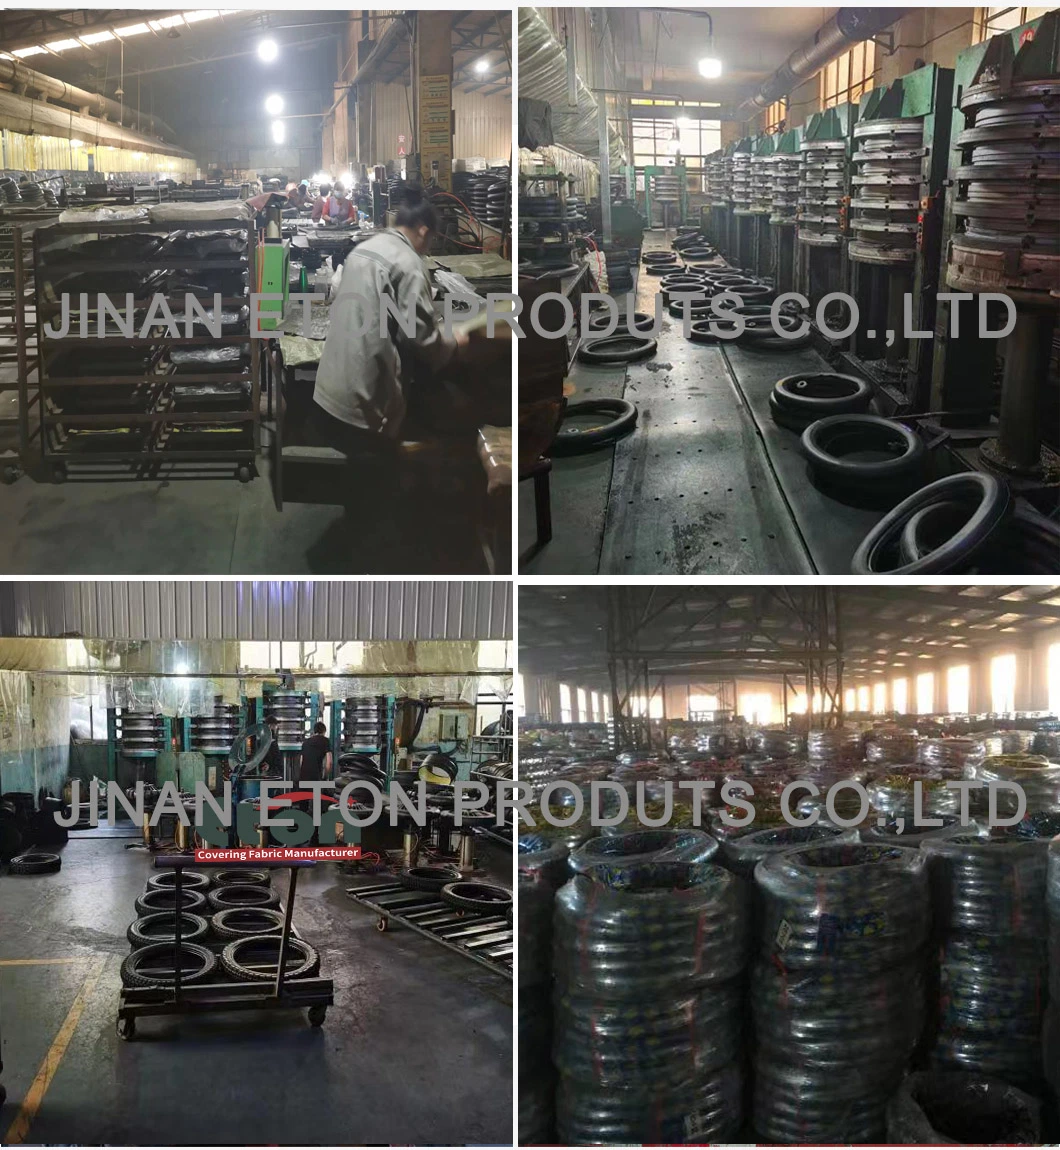 China Factory Manufacturer Best Price Motorcycle Tubeless TBR Trailer Truck Bus Radial Tyre Tires with Best Price 11.00r20 12.00r20 11r22.5 12r22.5 315/80r22.5